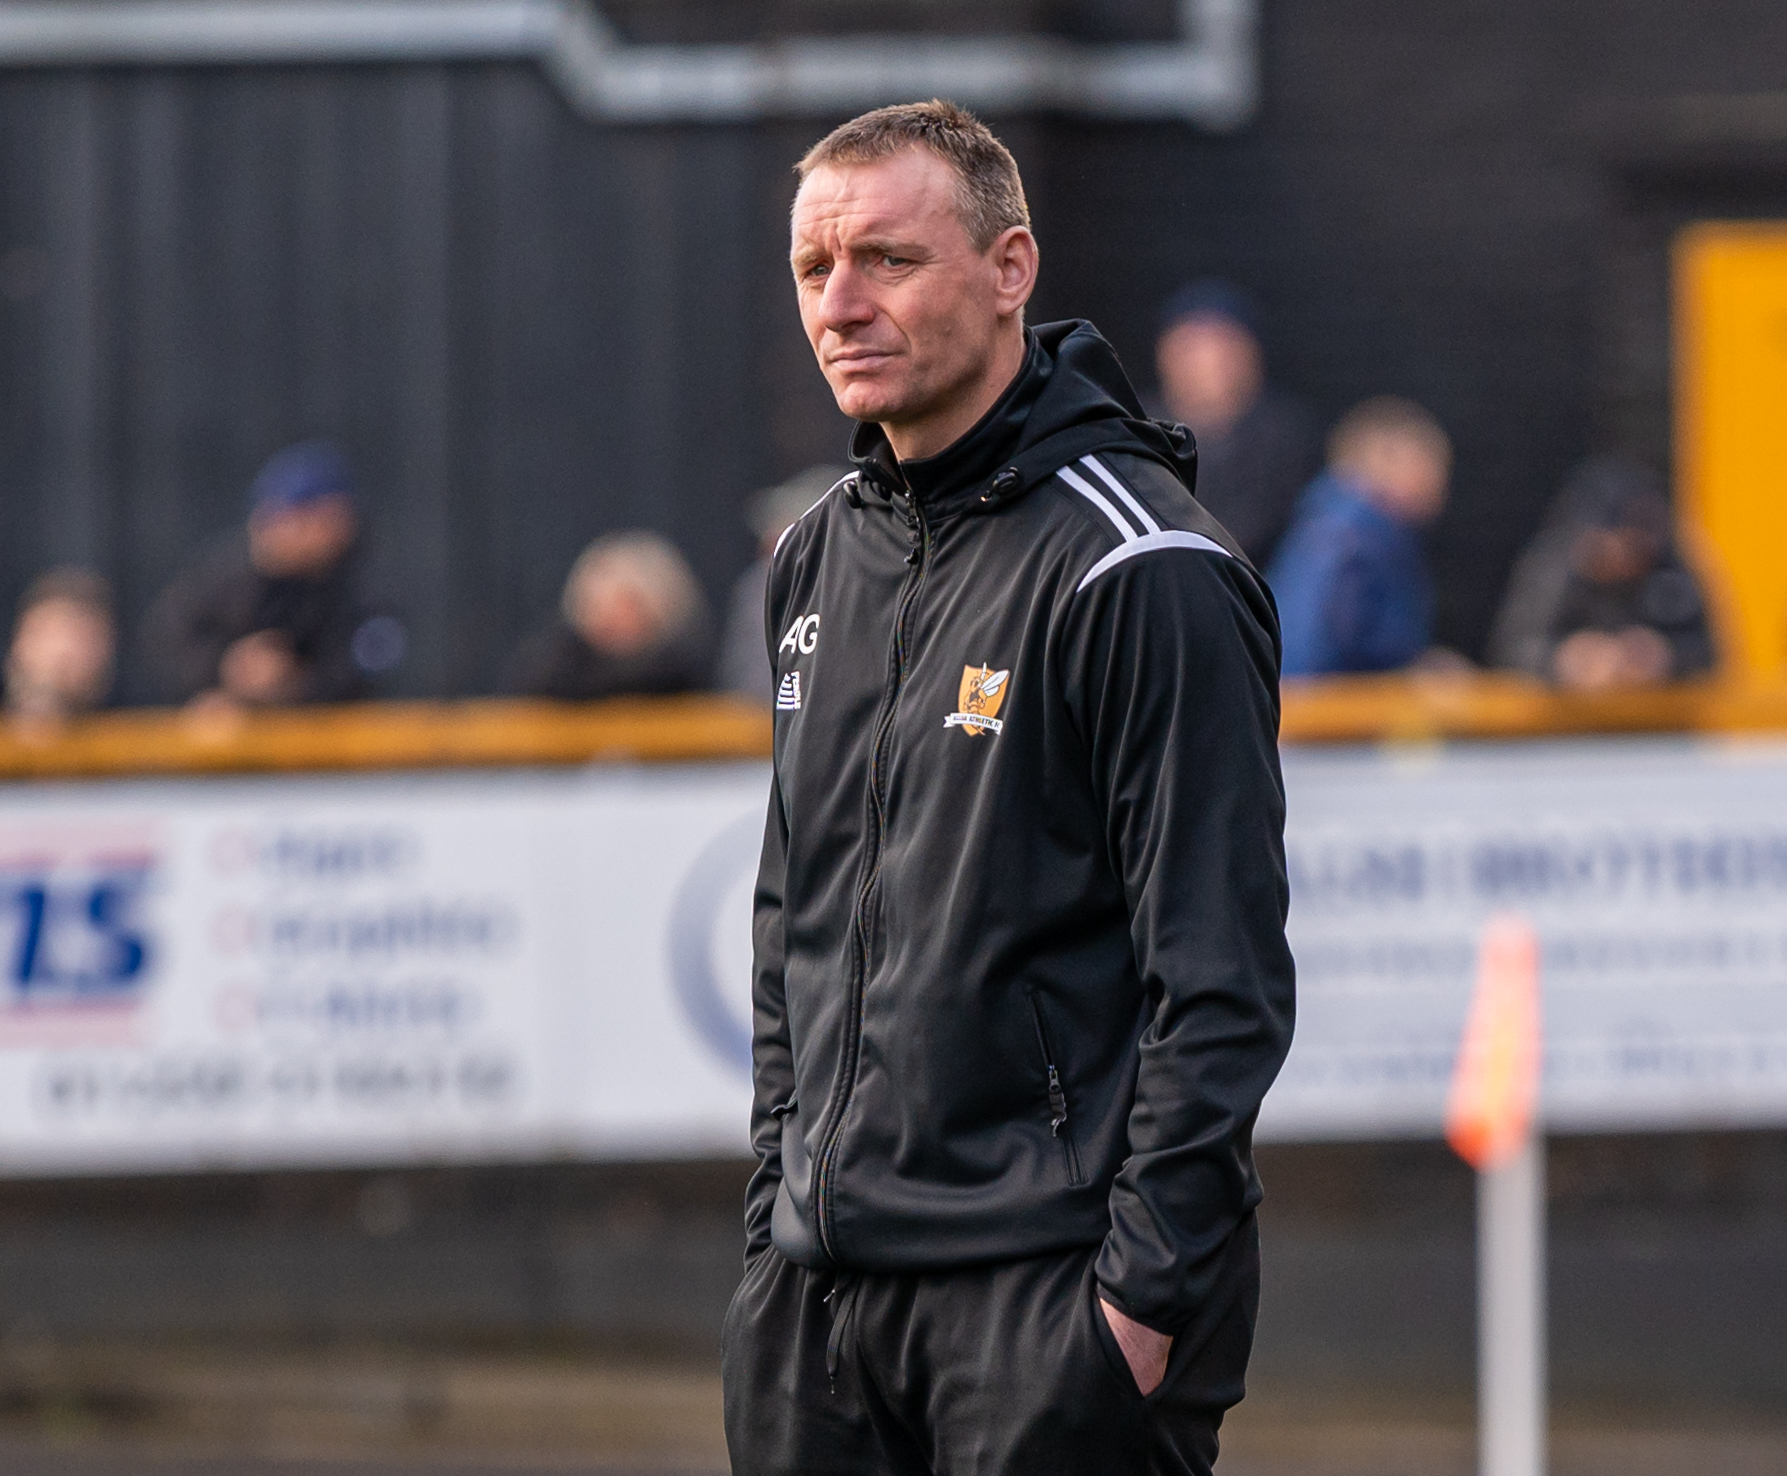 Alloa 0-1 Hamilton: Freak goal the difference in playoff test